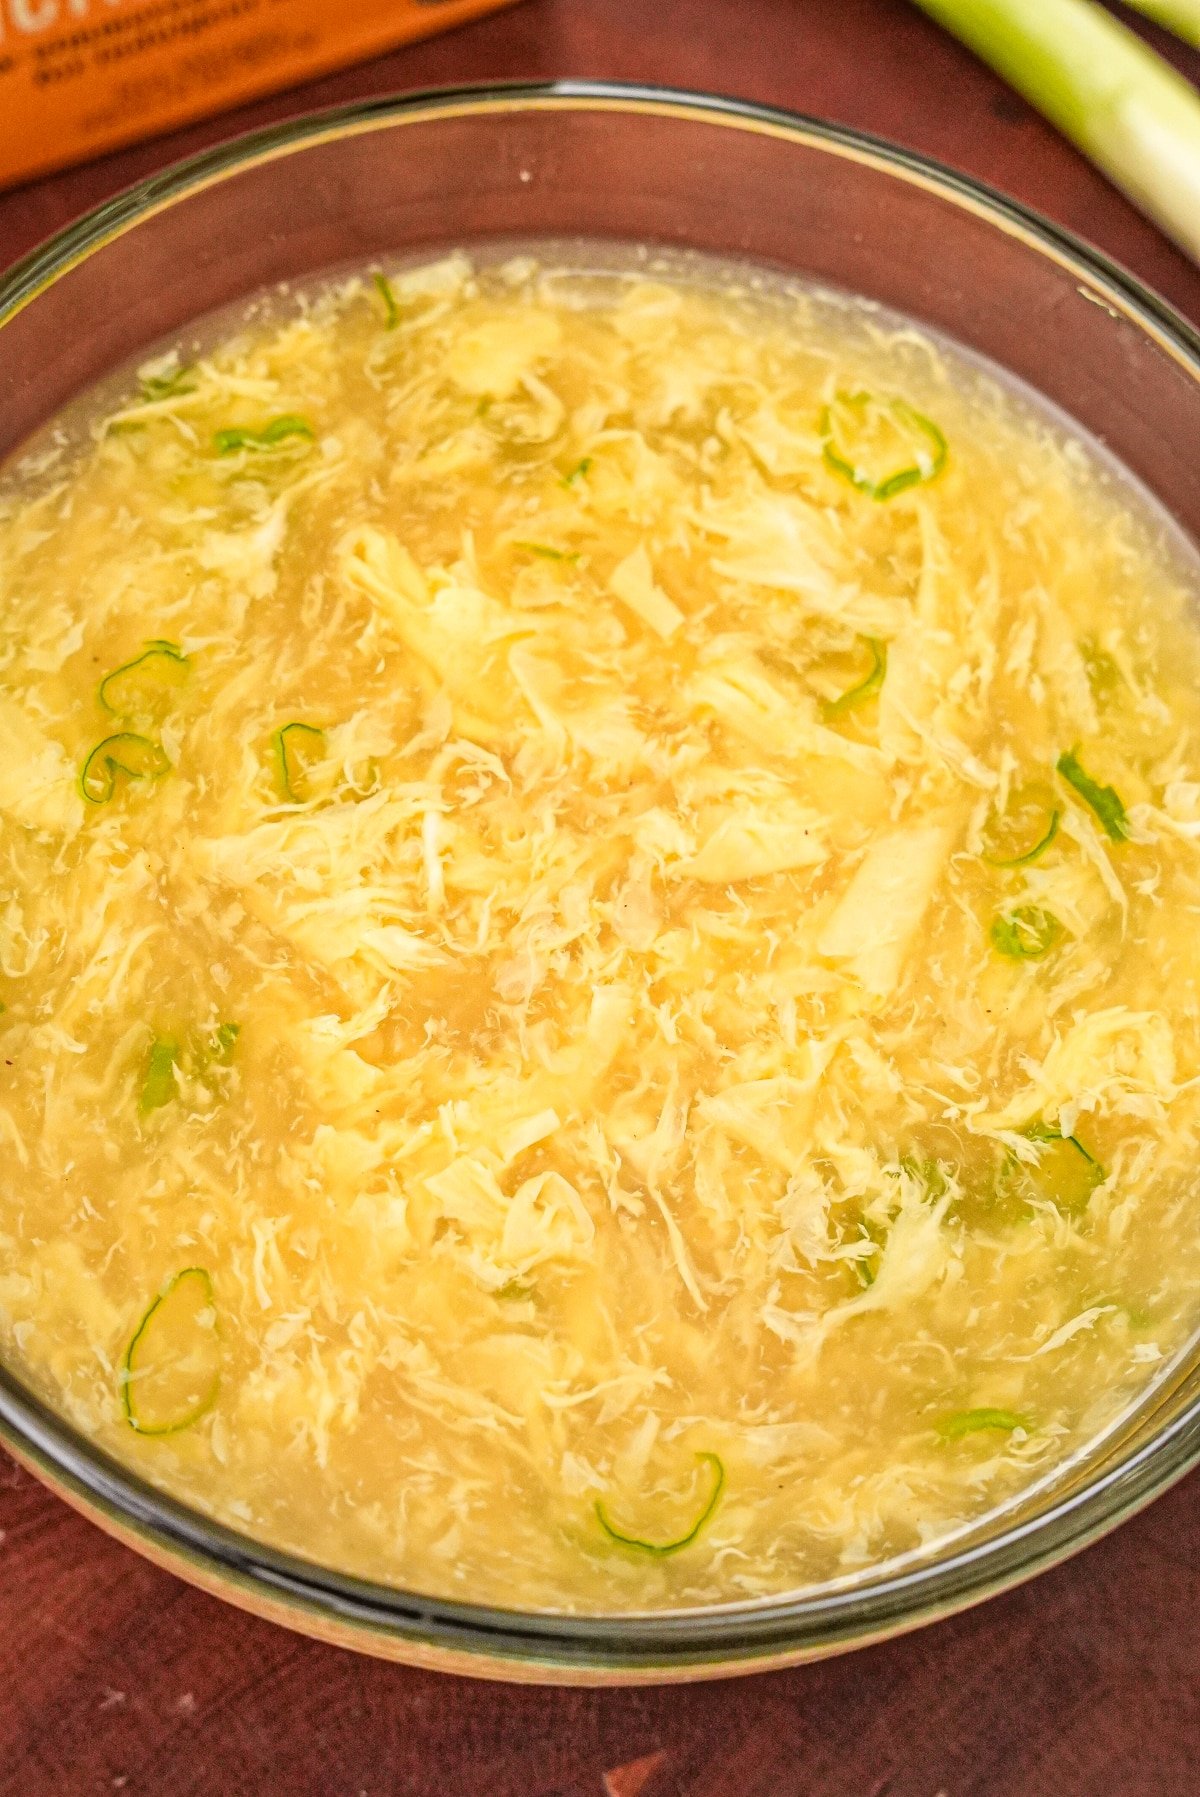 Egg drop soup in a glass bowl.